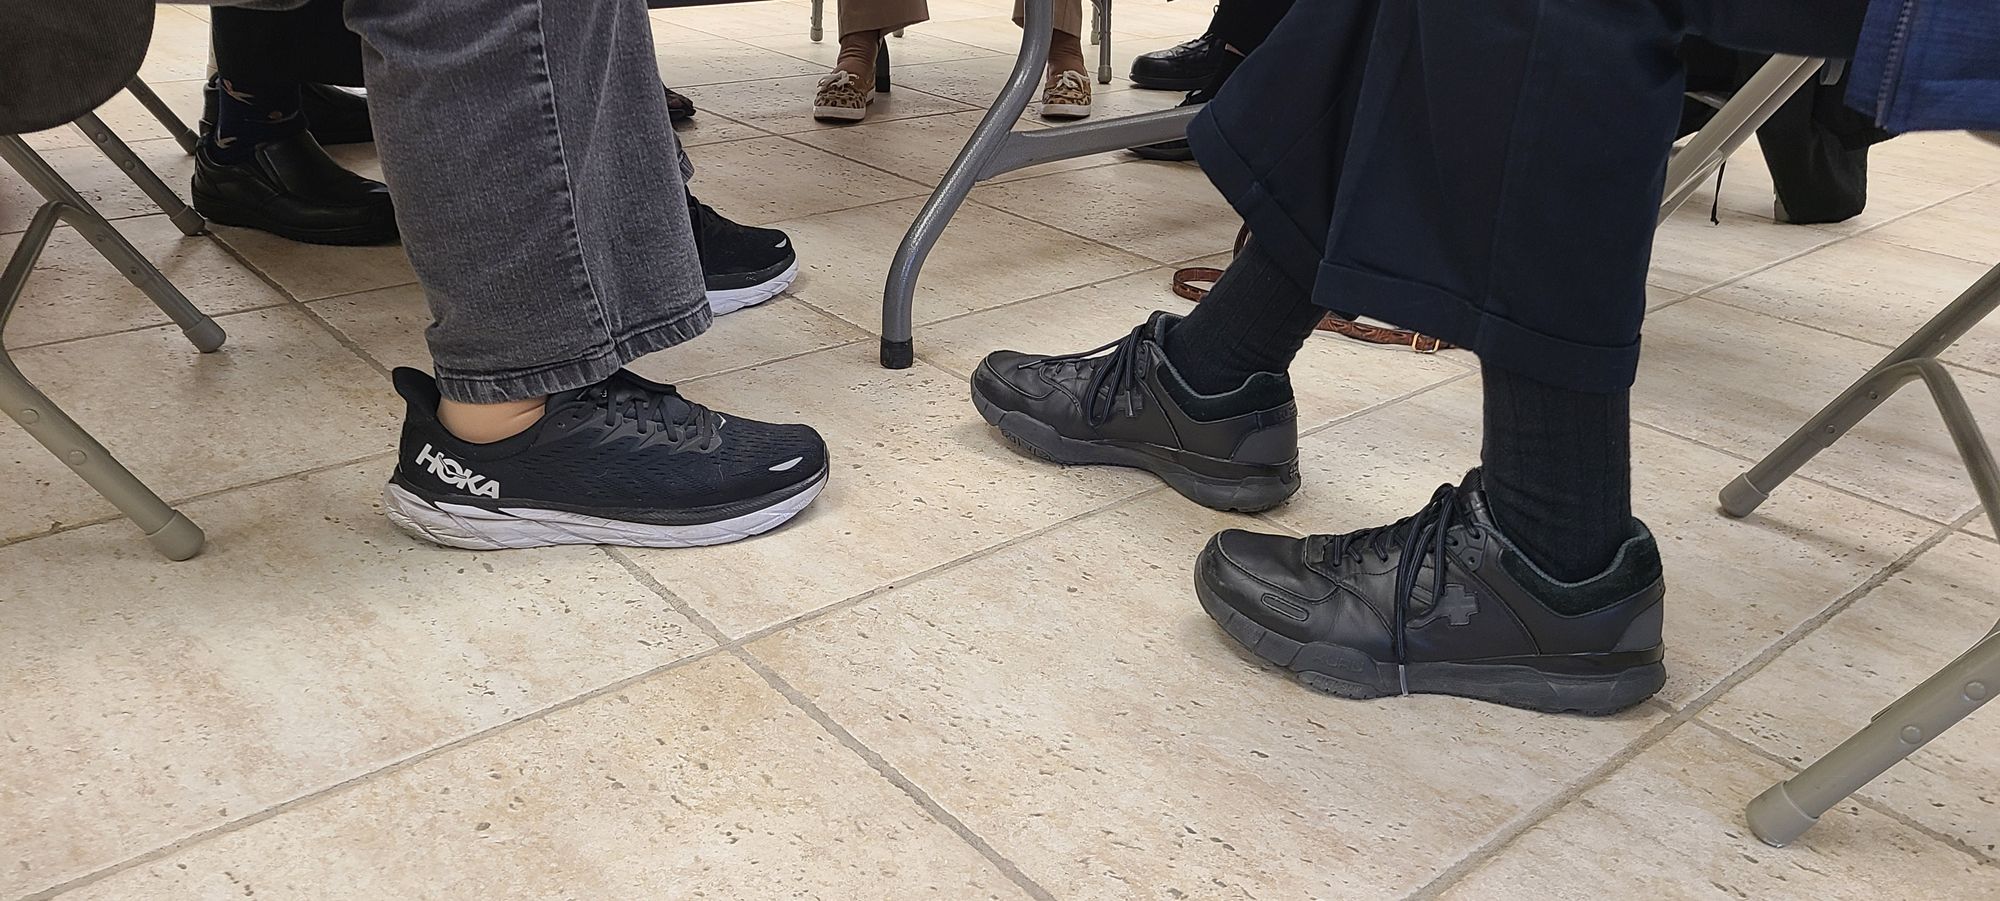 Two men sitting at the same table at the social hall of our church. One wearing black HOKAs and the other wearing black KURUs.